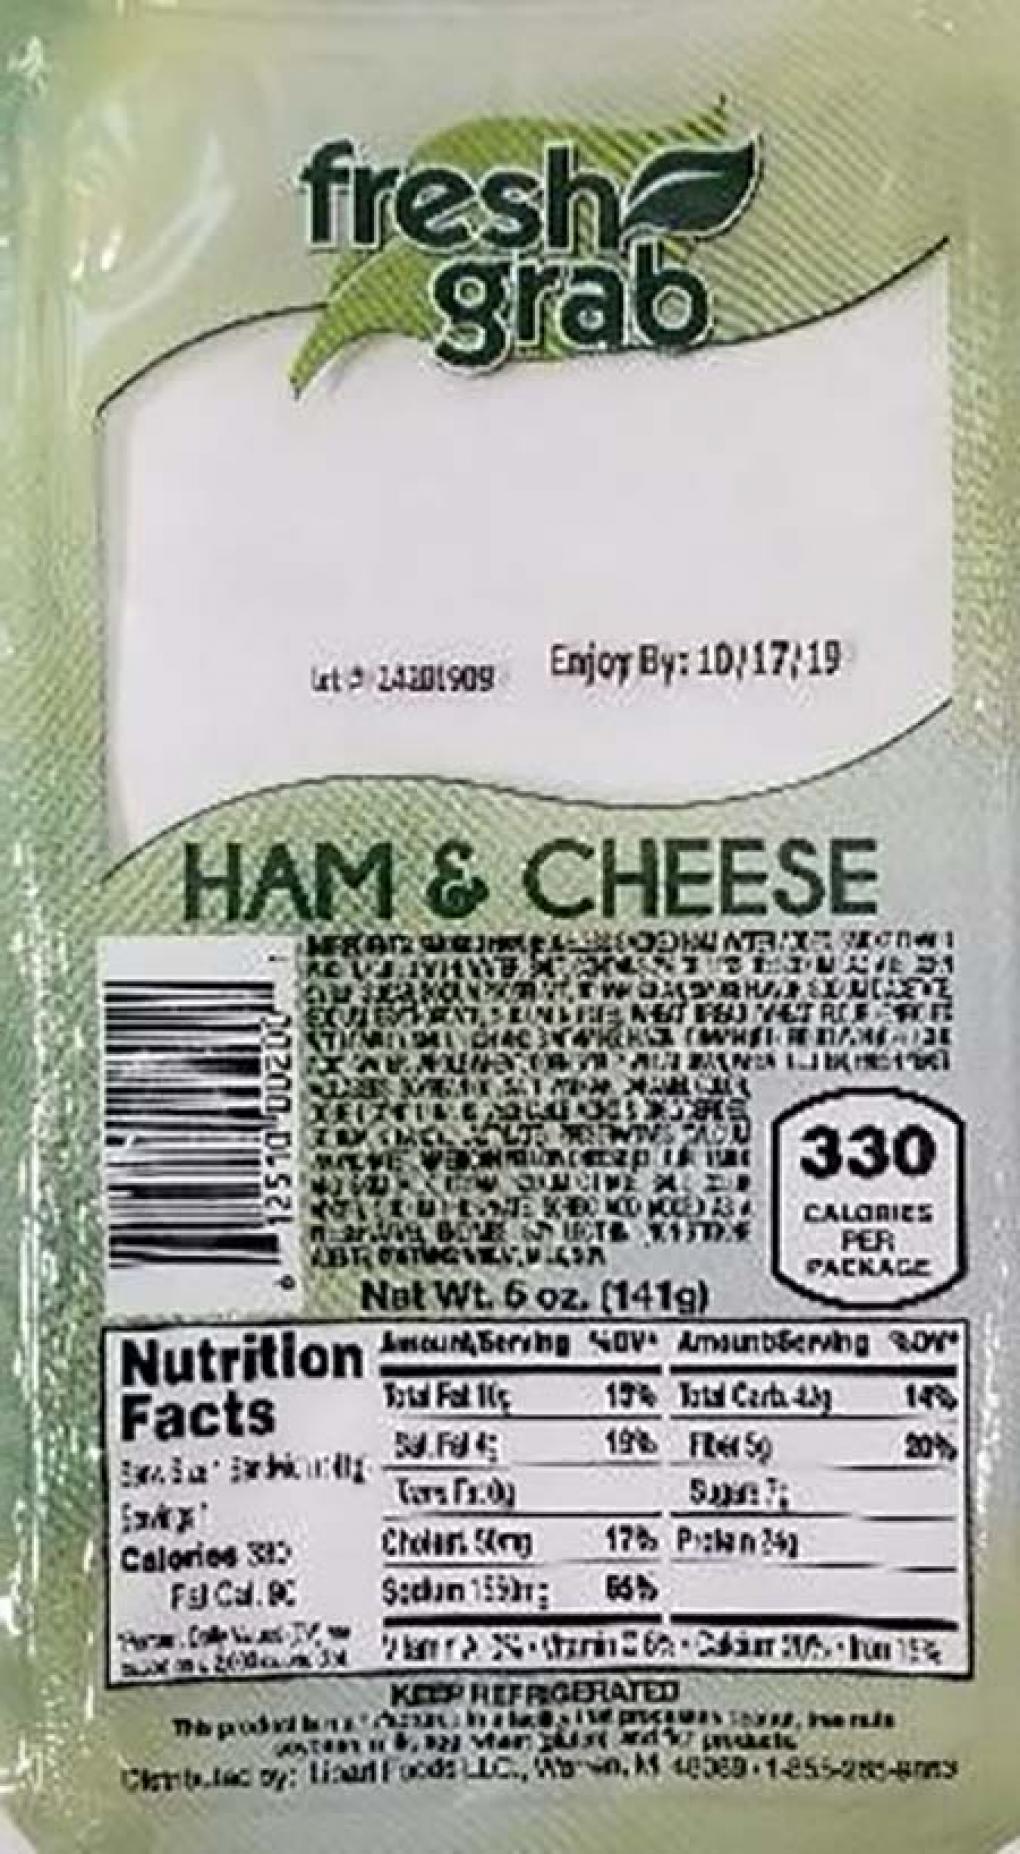 Lipari Foods expanded its recall due to Listeria to include Recall of Ham & Cheese Wedge Sandwiches